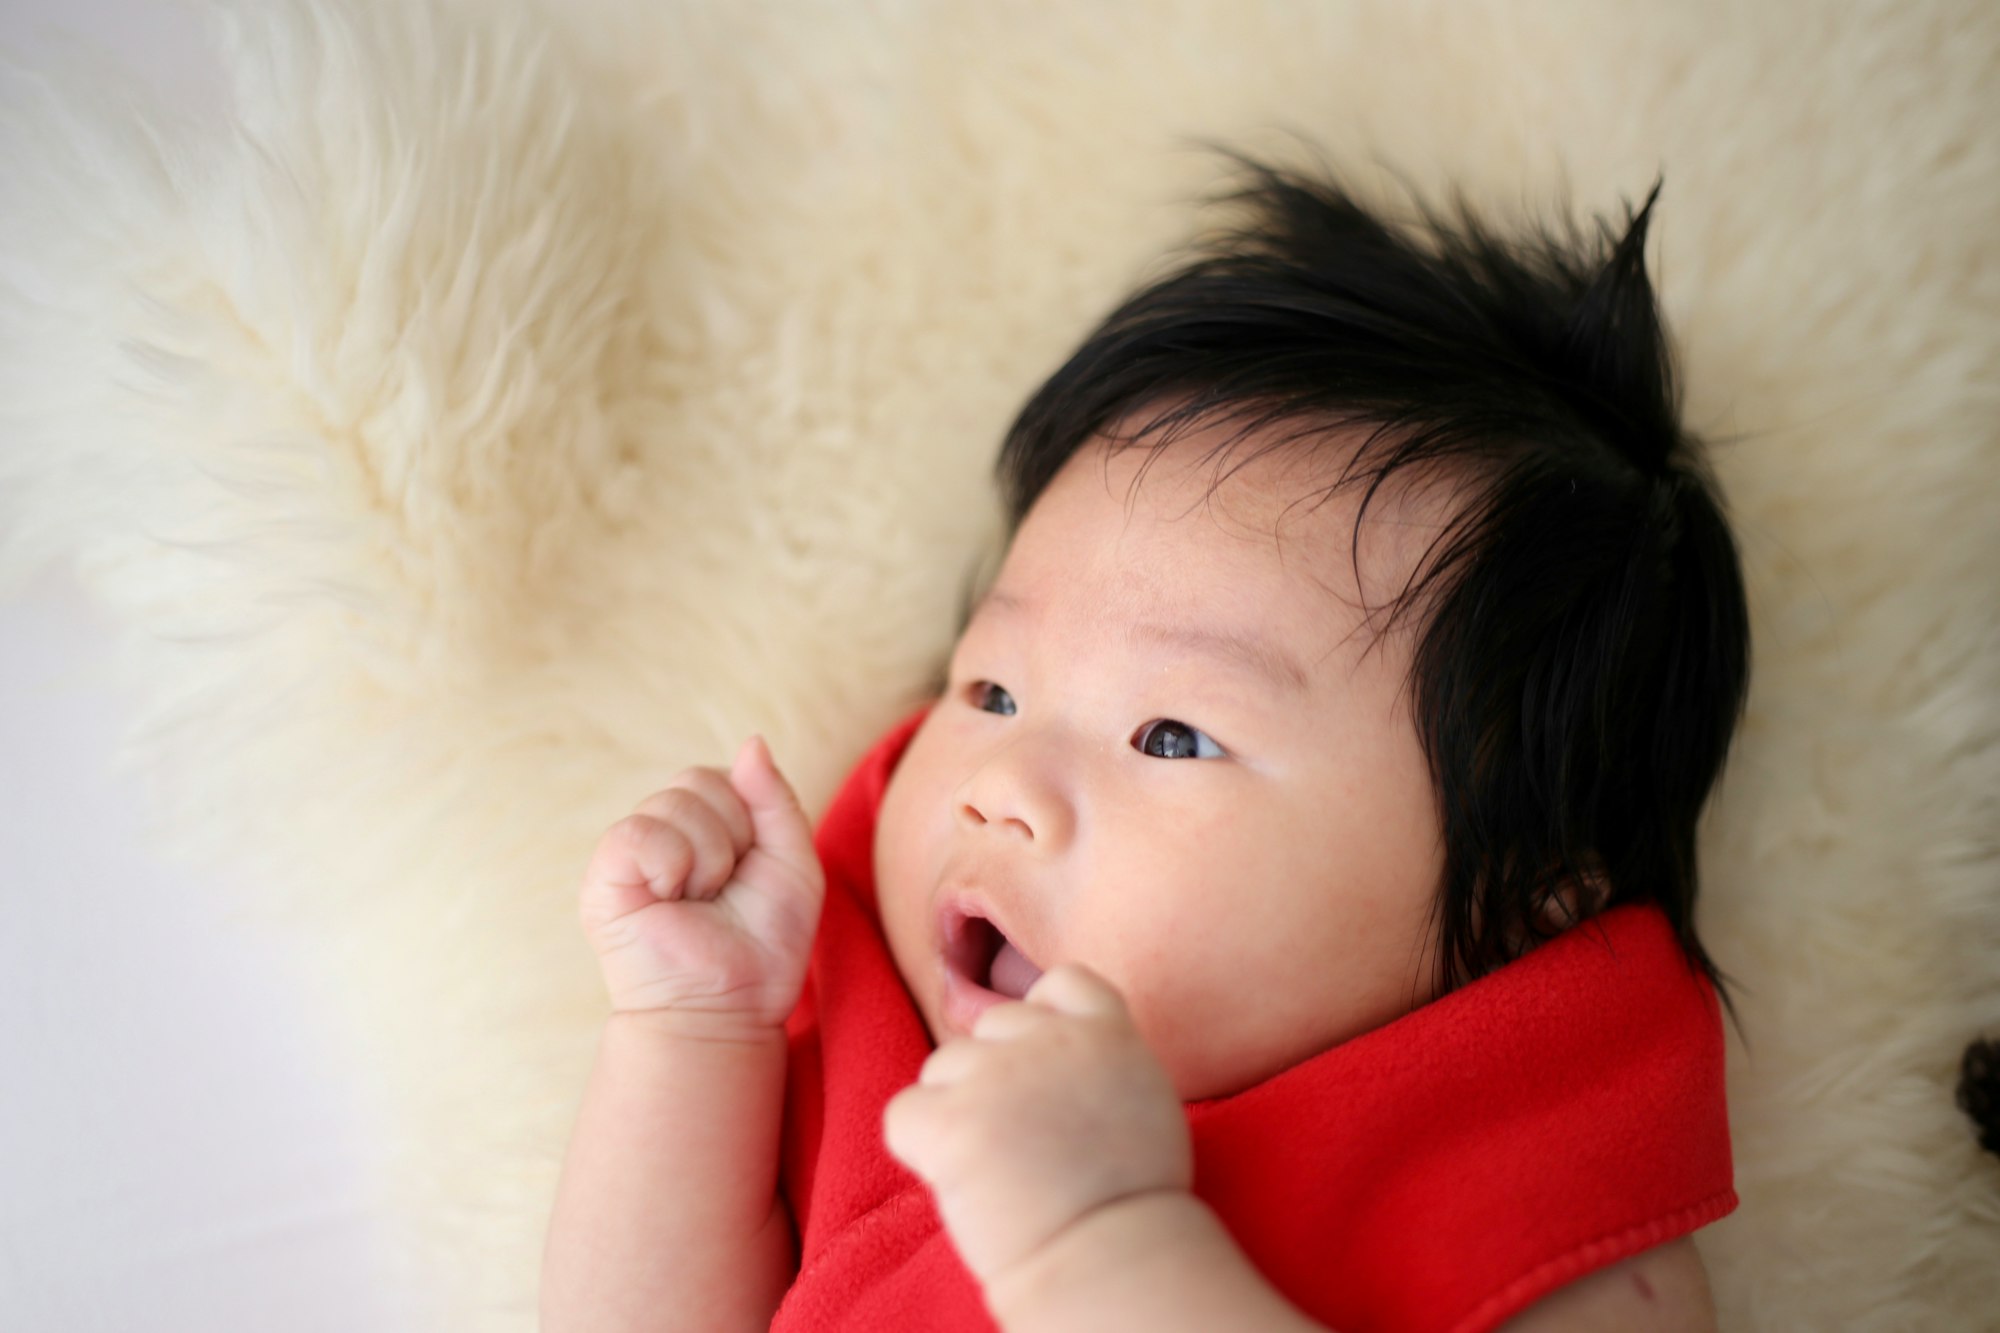 cute baby, baby in red, baby making fist, asian baby